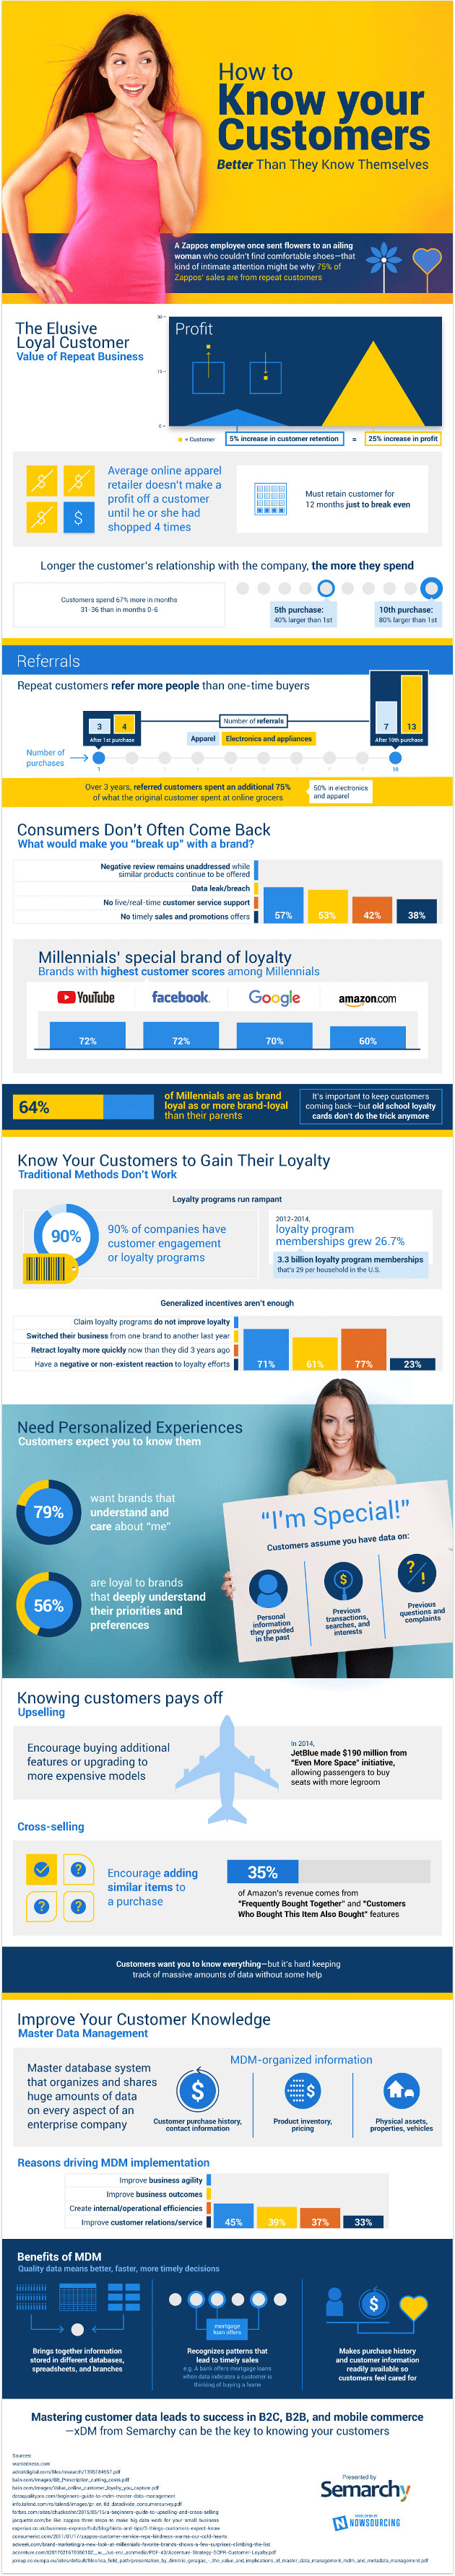 Customer Loyalty Today Is Always The Key [Infographic]